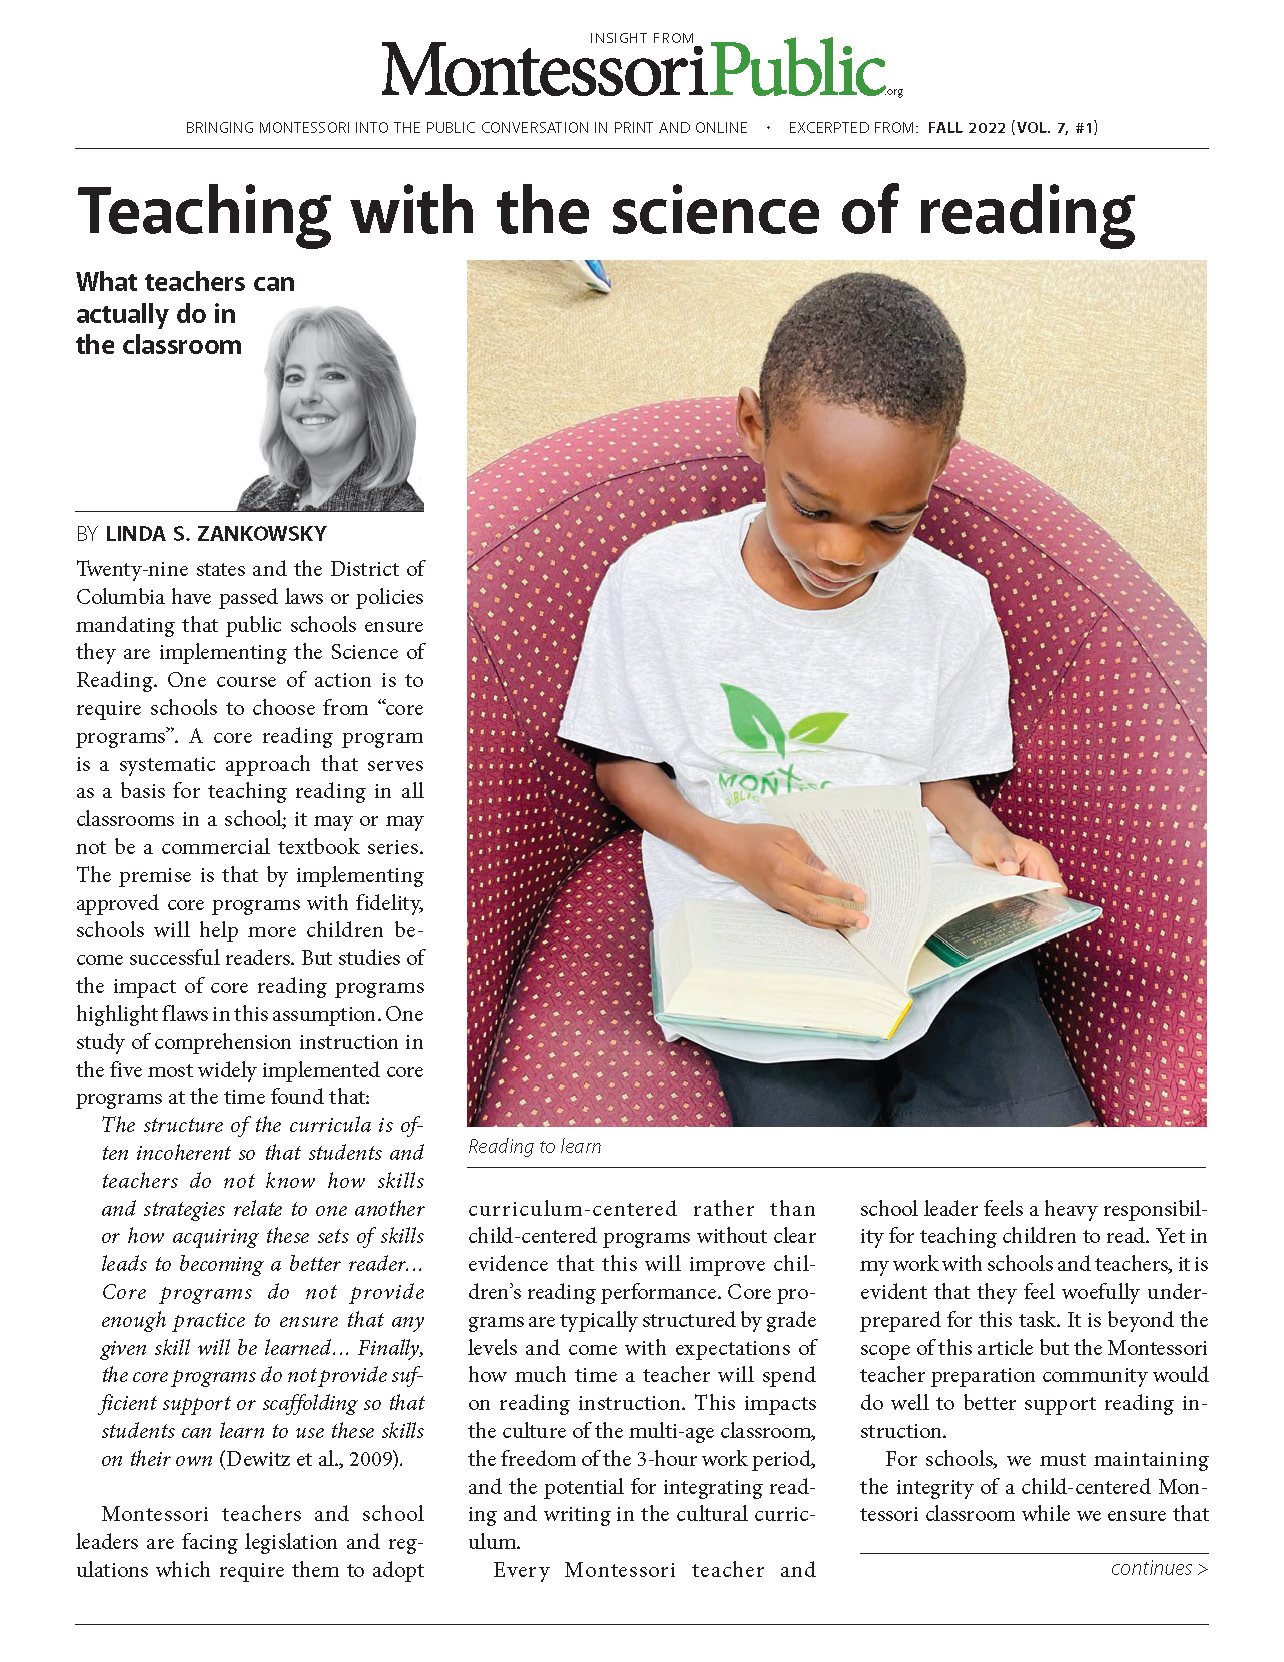 Teaching with the science of reading